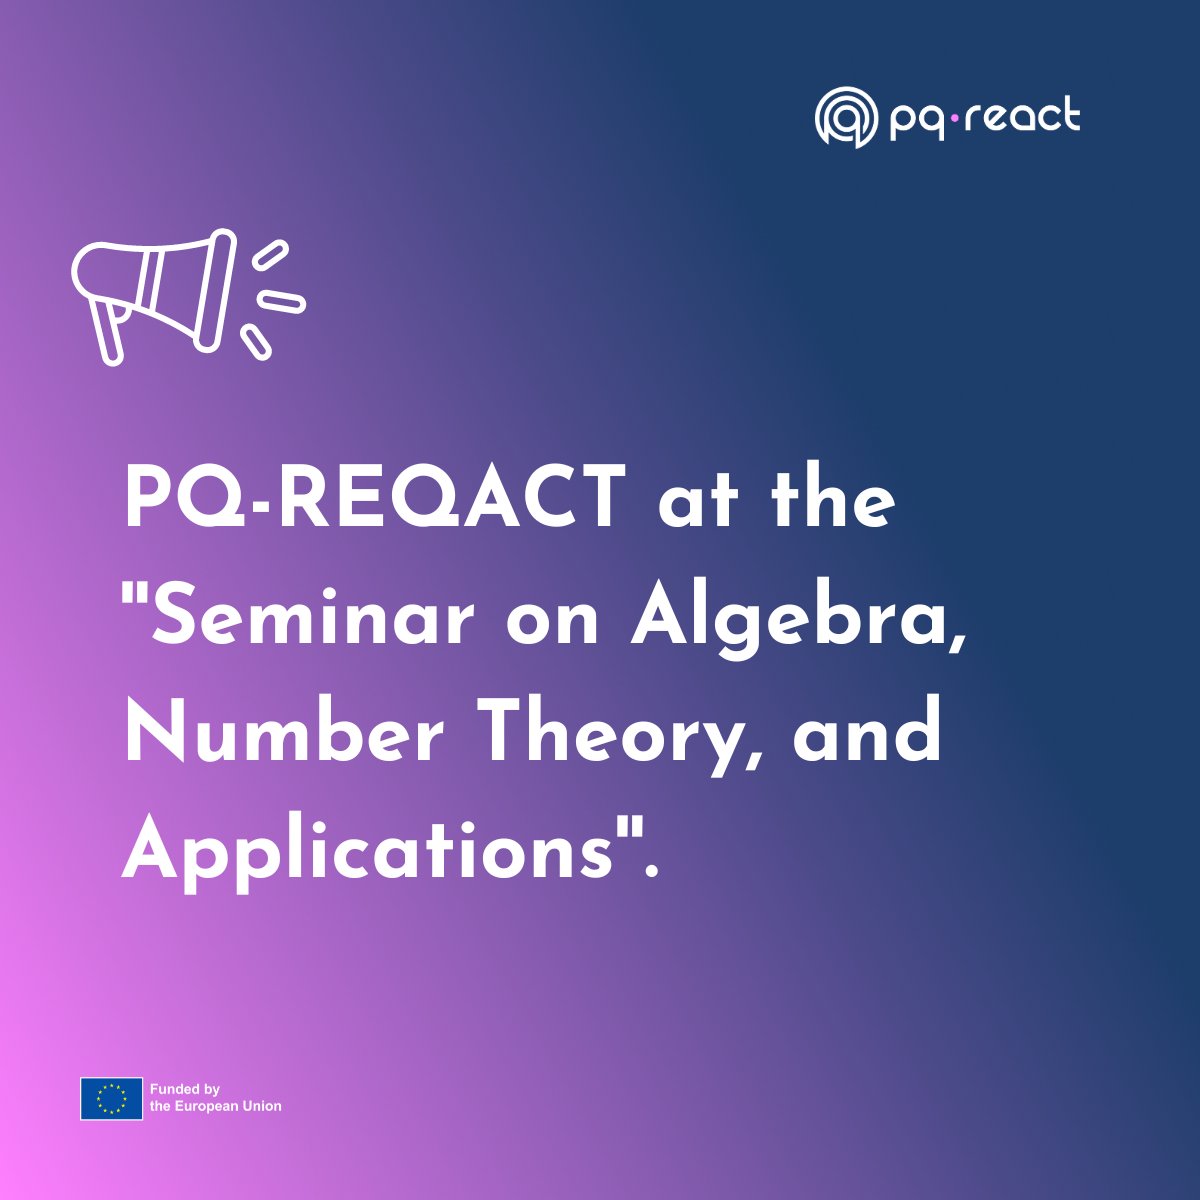 📣 The time has come! Tomorrow, @IndraCompany will participate in the ''Seminar on Algebra, Number Theory, and Applications''! 👨‍💻The presentation will include an “Overview and extension of root-based attacks against PLWE instances”, spreading the word for @PQREACT! ❗️Stay tuned!